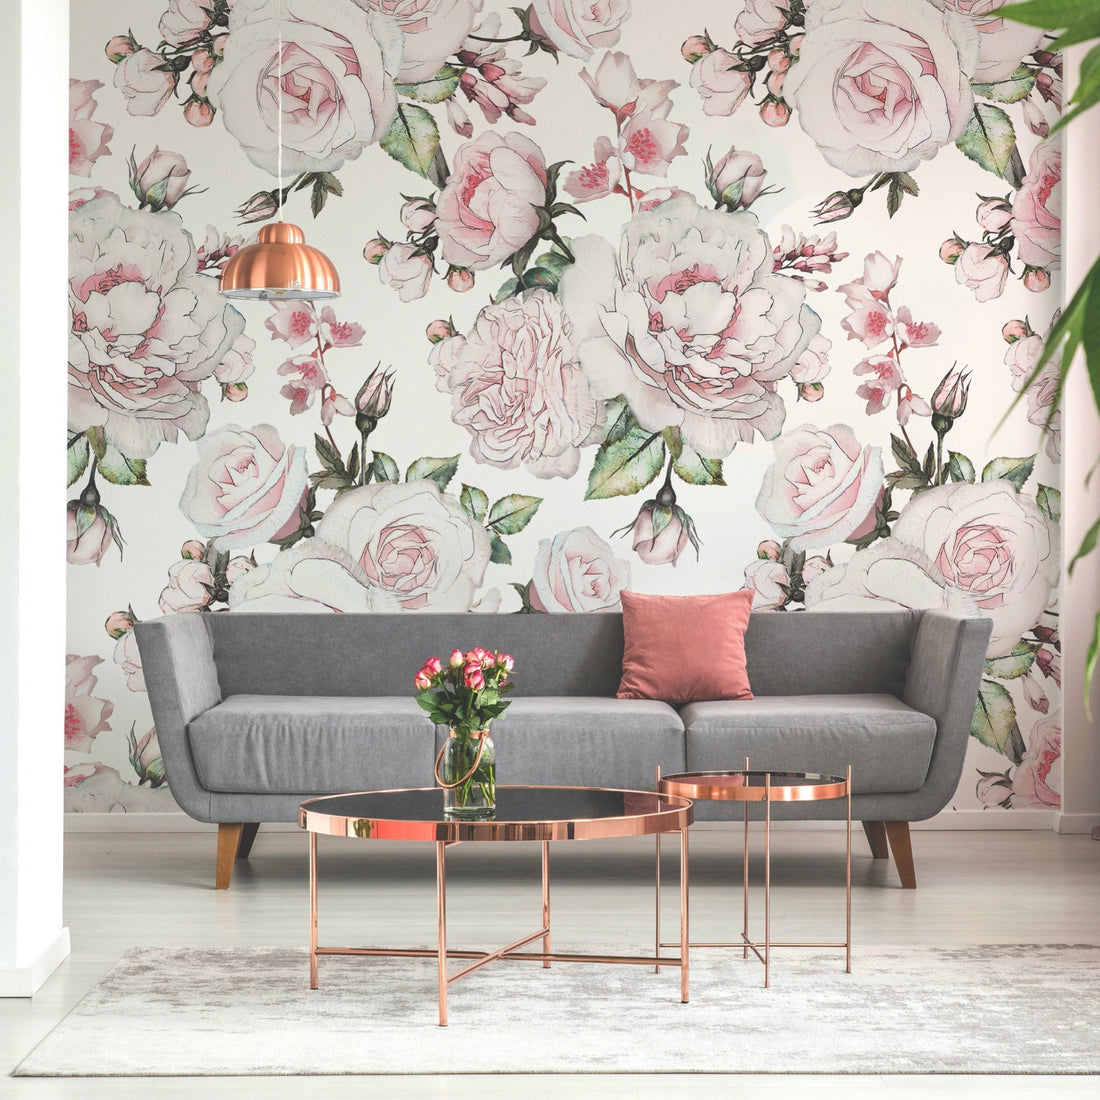 Oversized classic rose pattern wallpaper with stunning outline detail by WallpaperMural